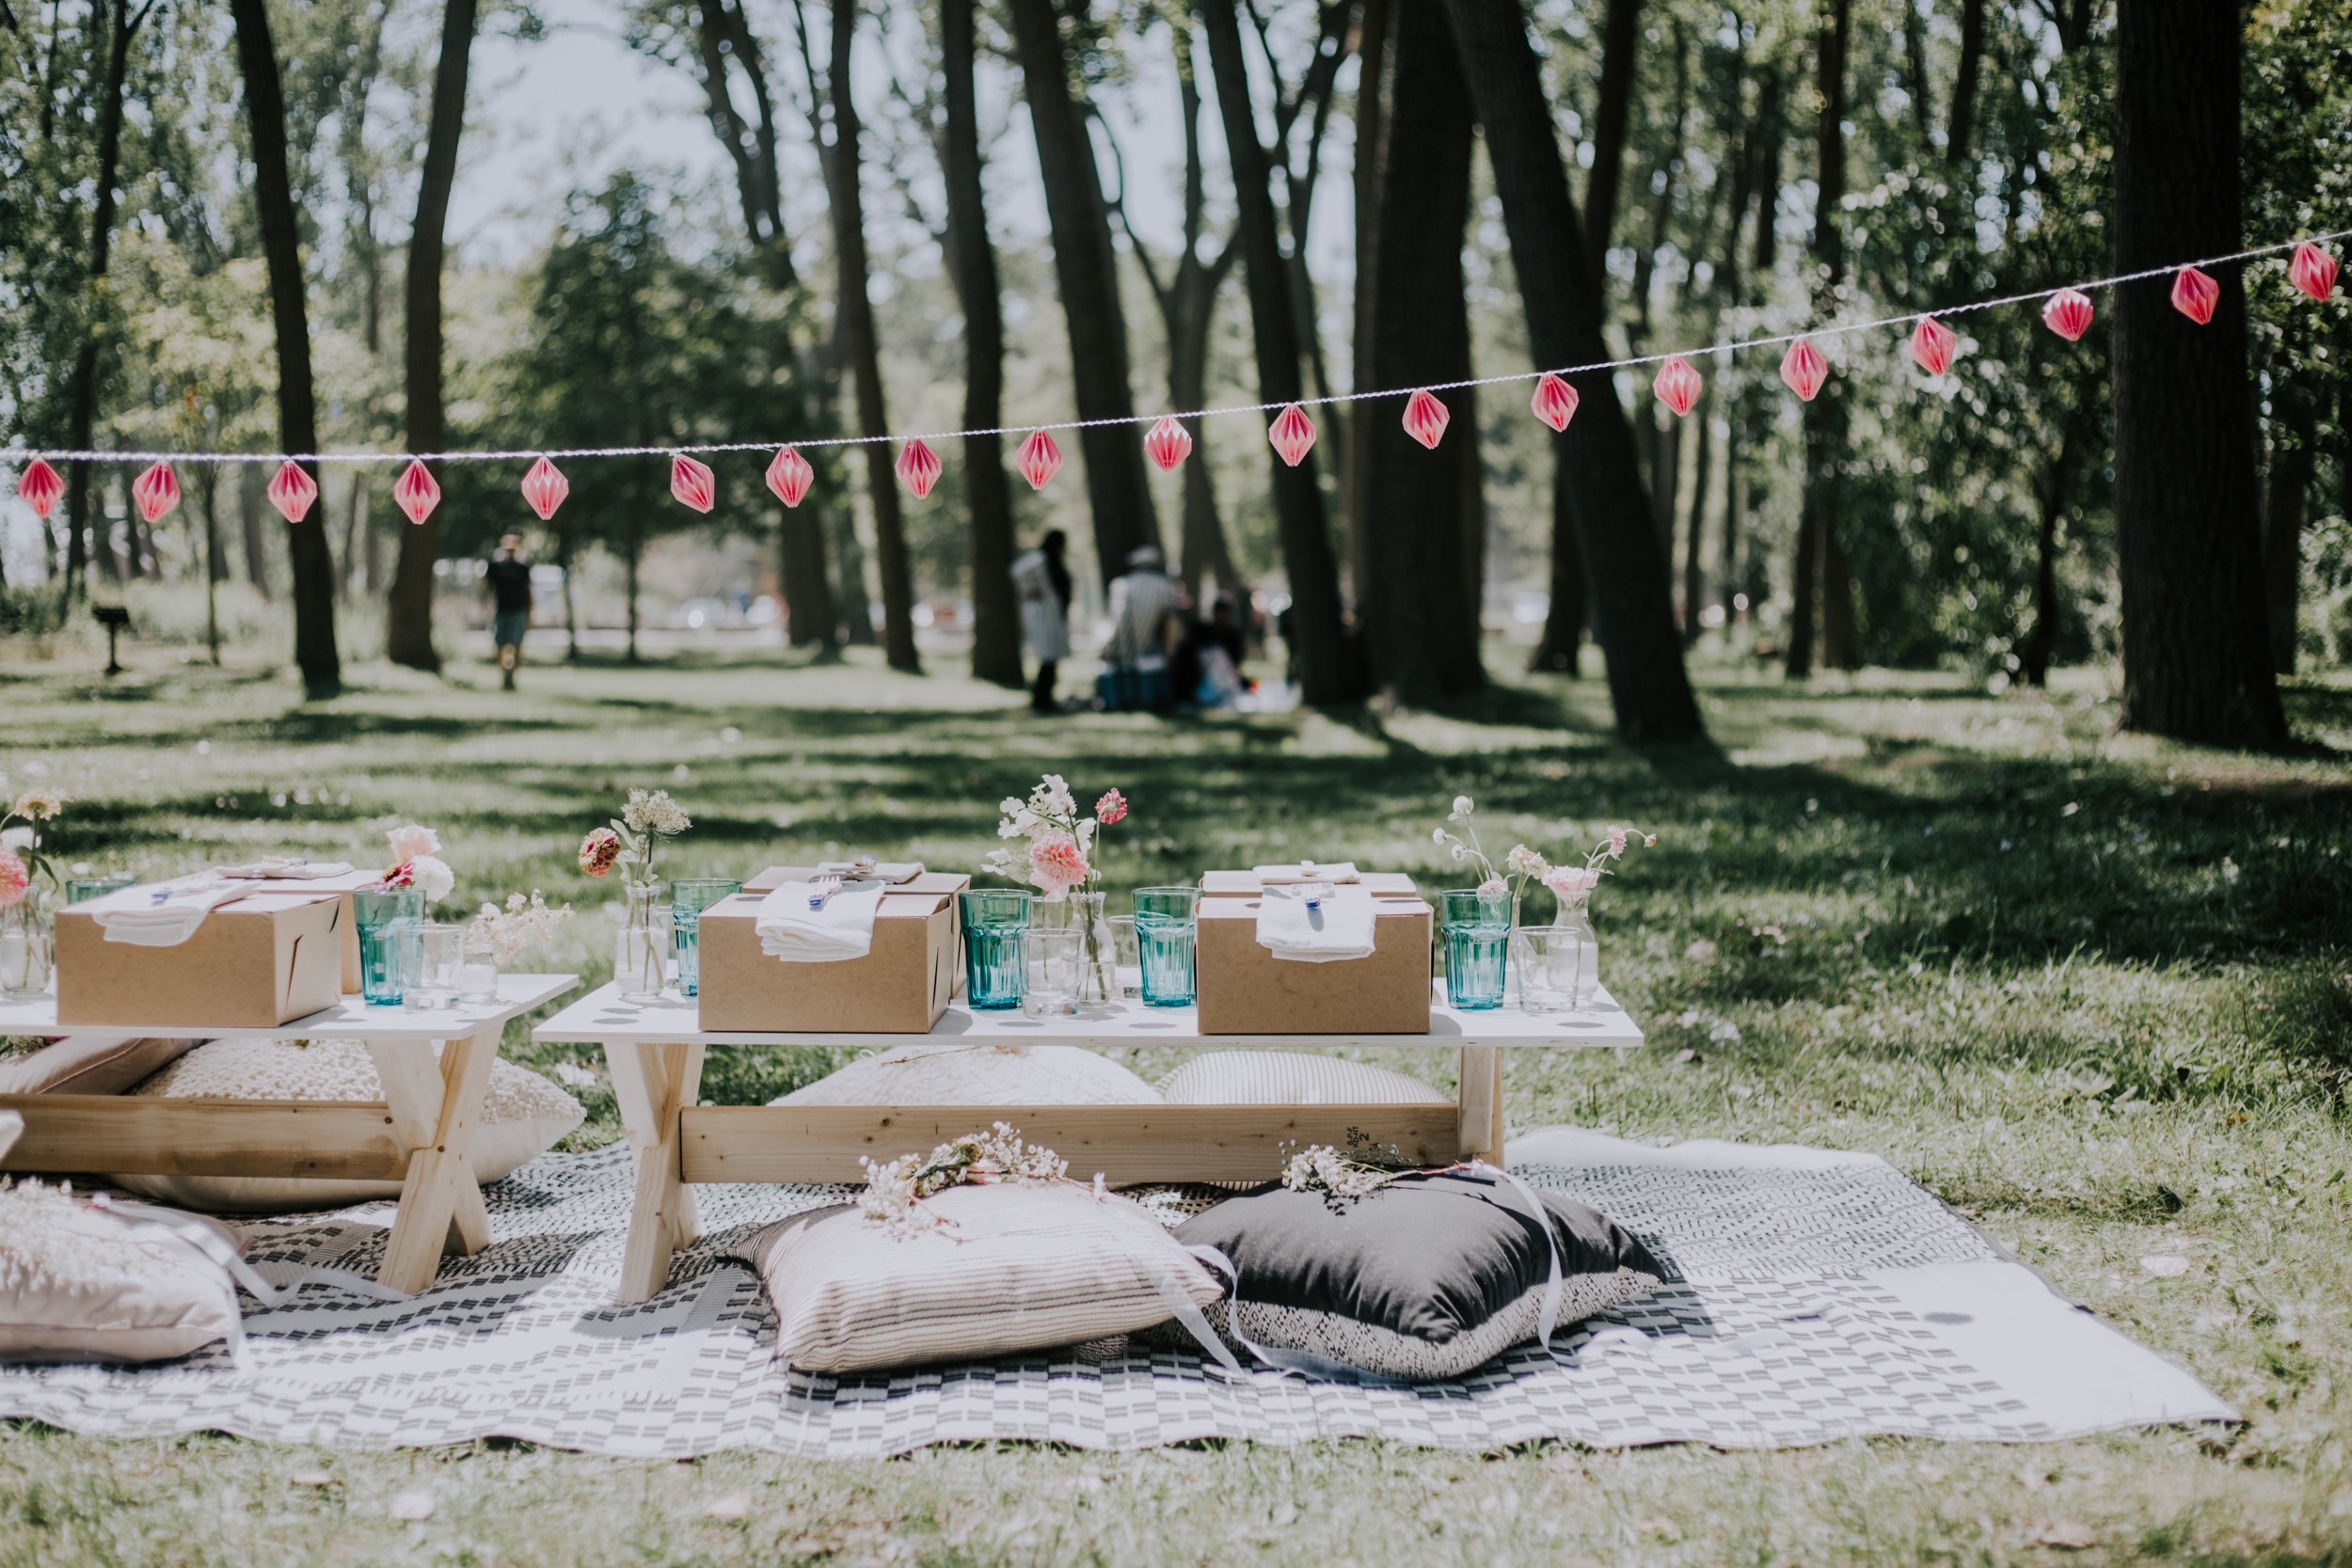 luxury picnic with boxed lunches, cushions and rugs